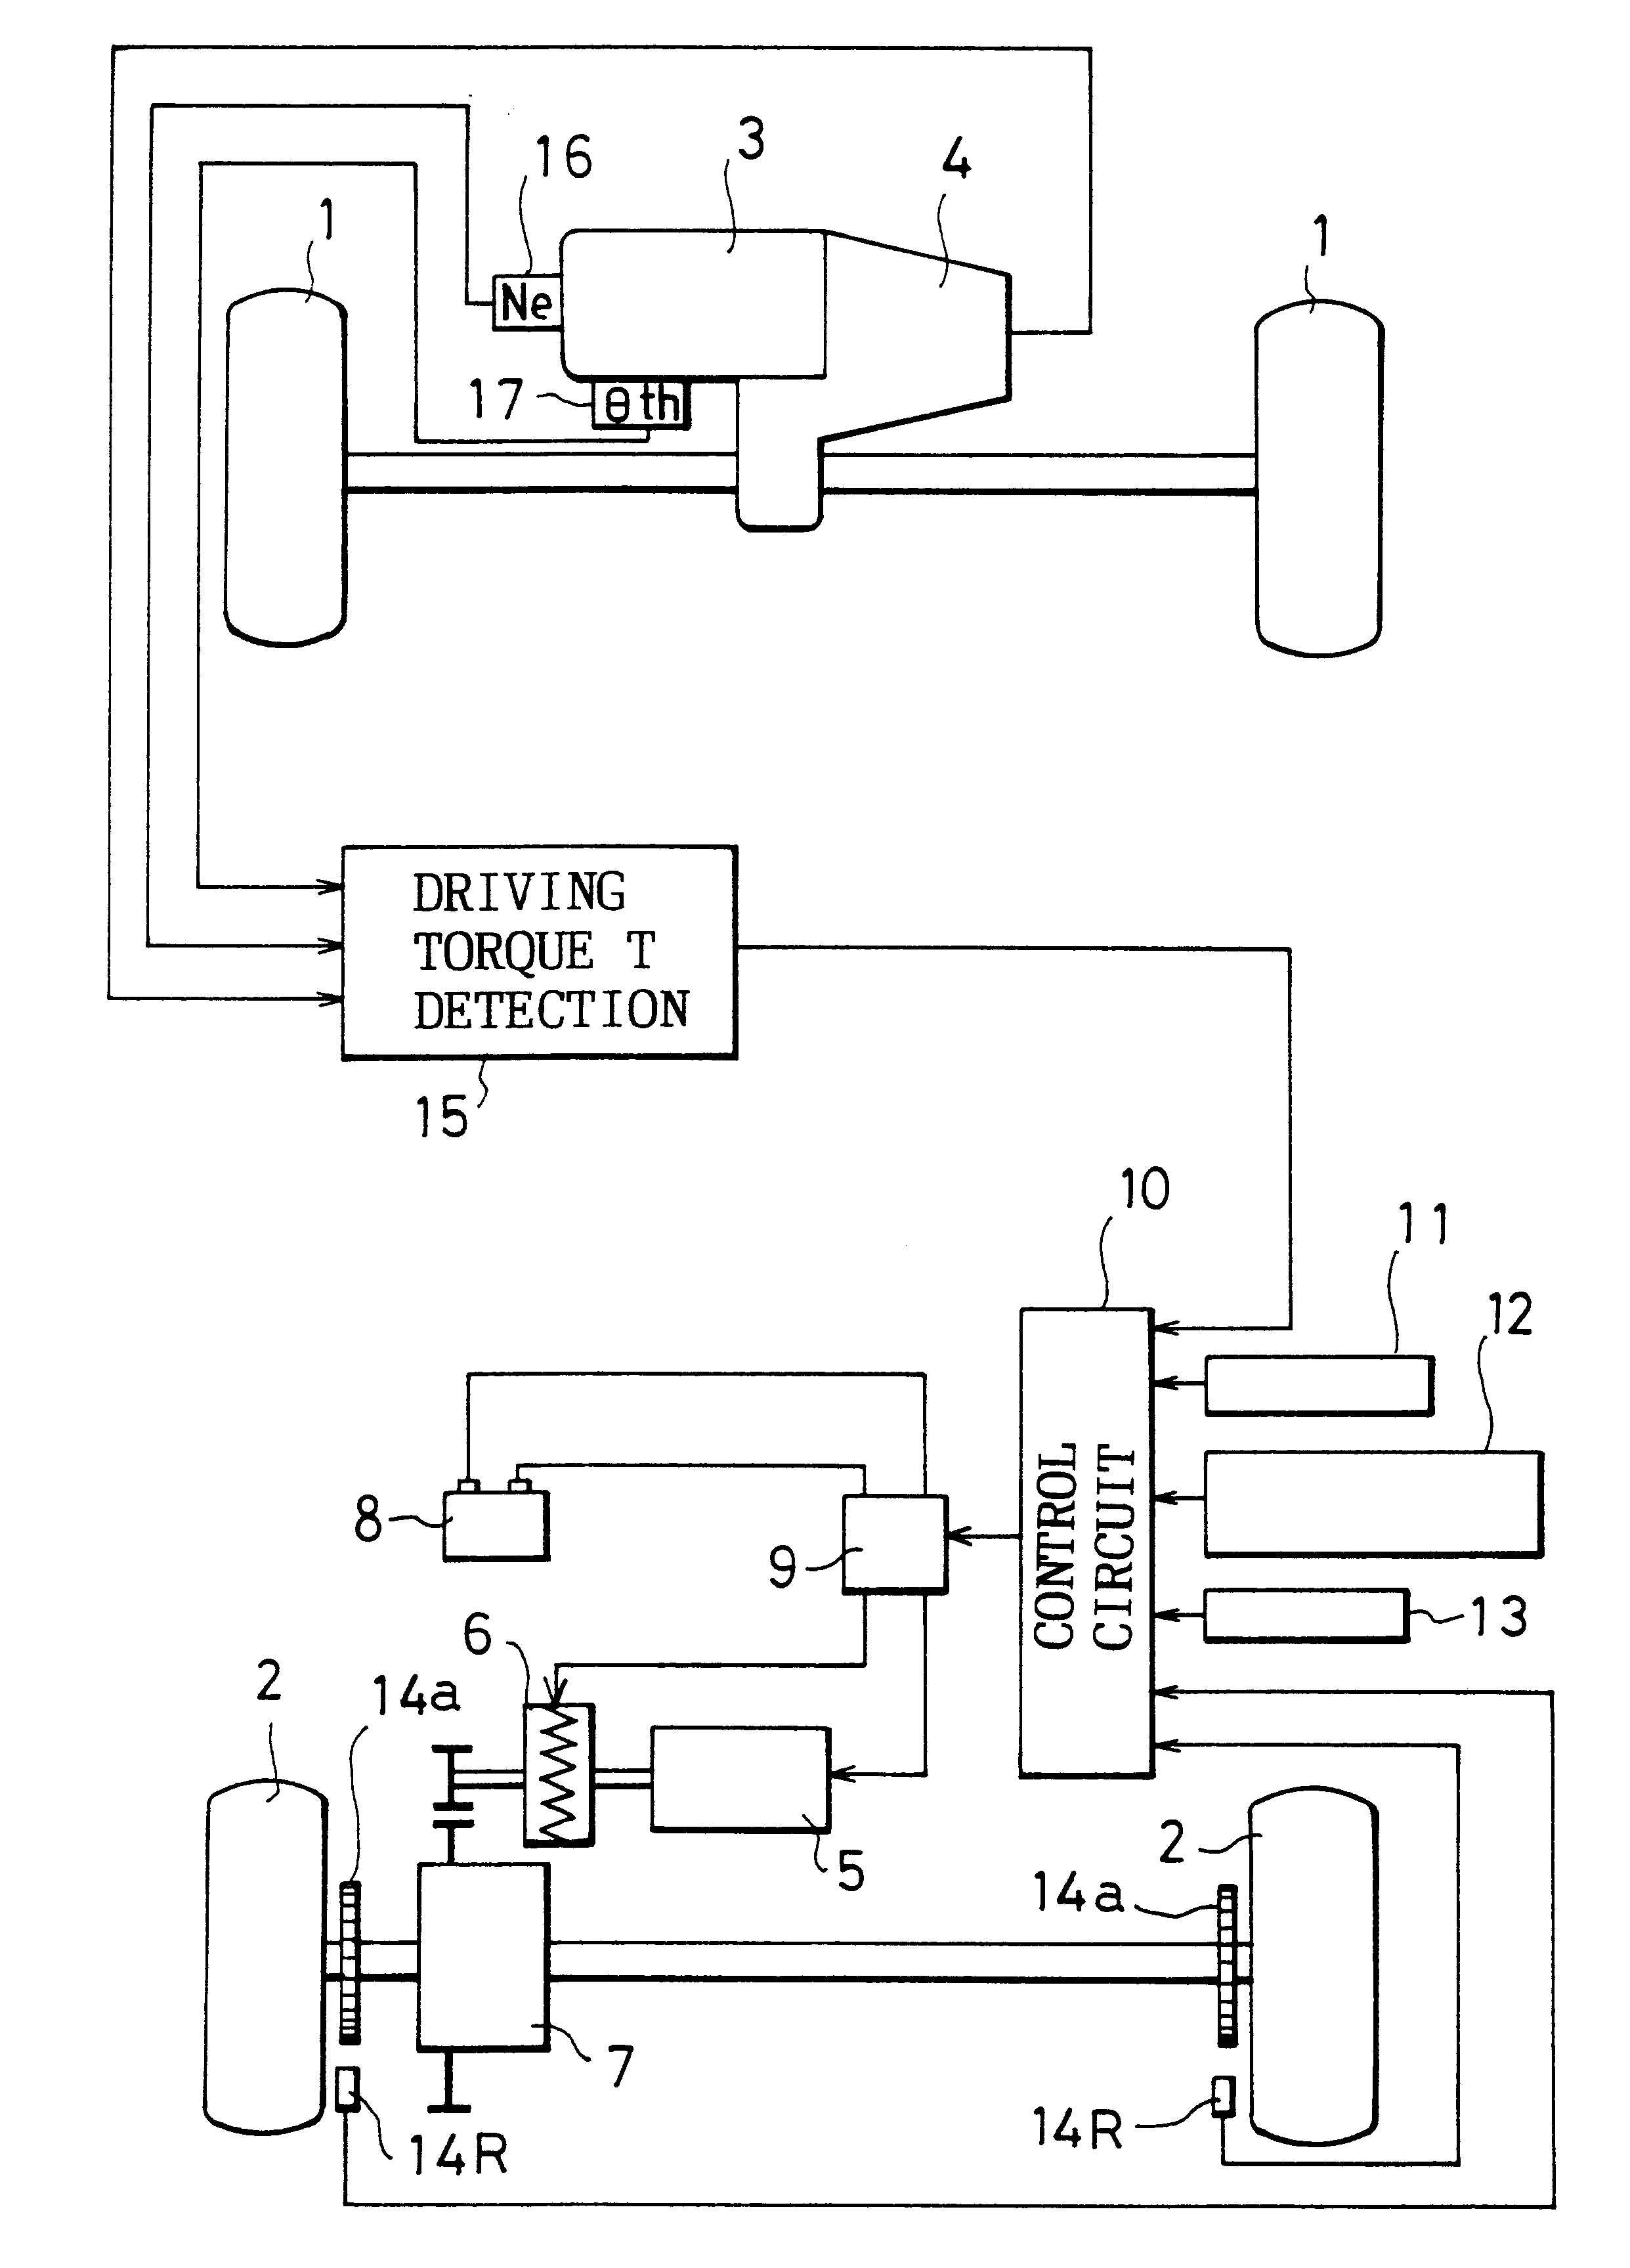 Torque detector and controls for prohibiting the operation of an electric motor on a hybrid vehicle when the driving torque of the vehicle exceeds a predetermined value during start-up